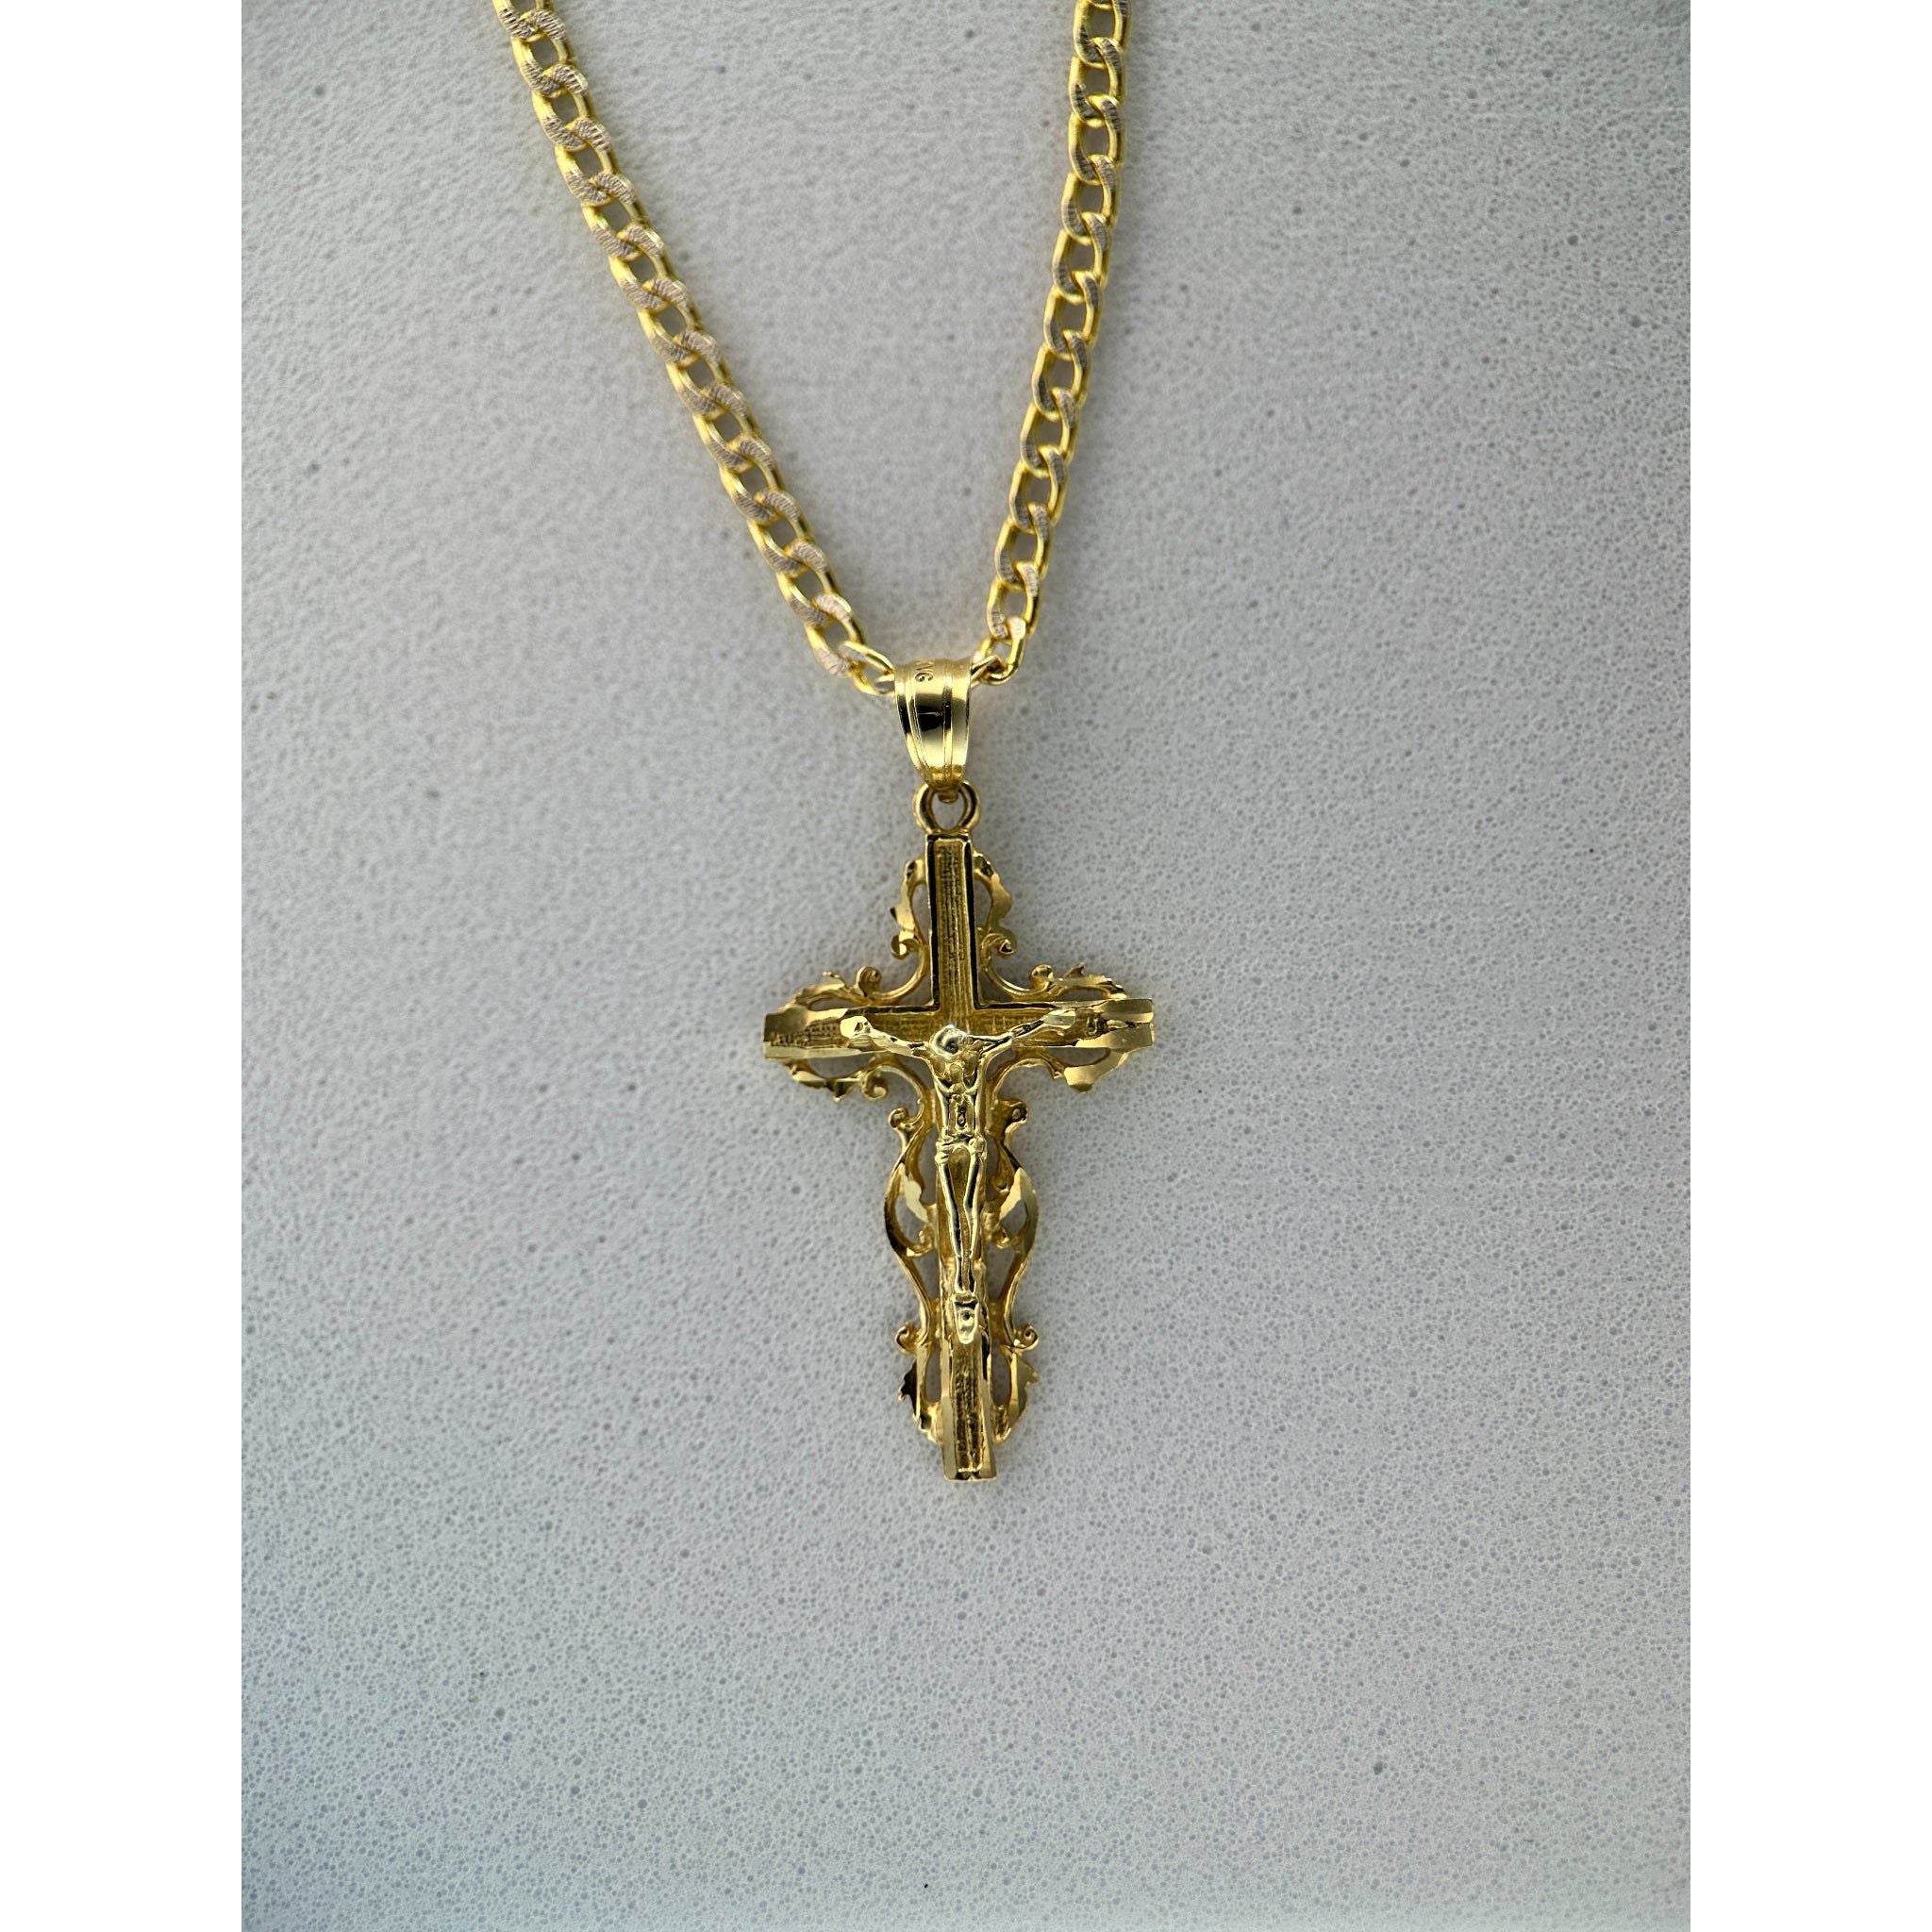 DR1931 - 14K Yellow Gold - Lab Created Stones - Gold Chain & Charm - 14K Crucifix